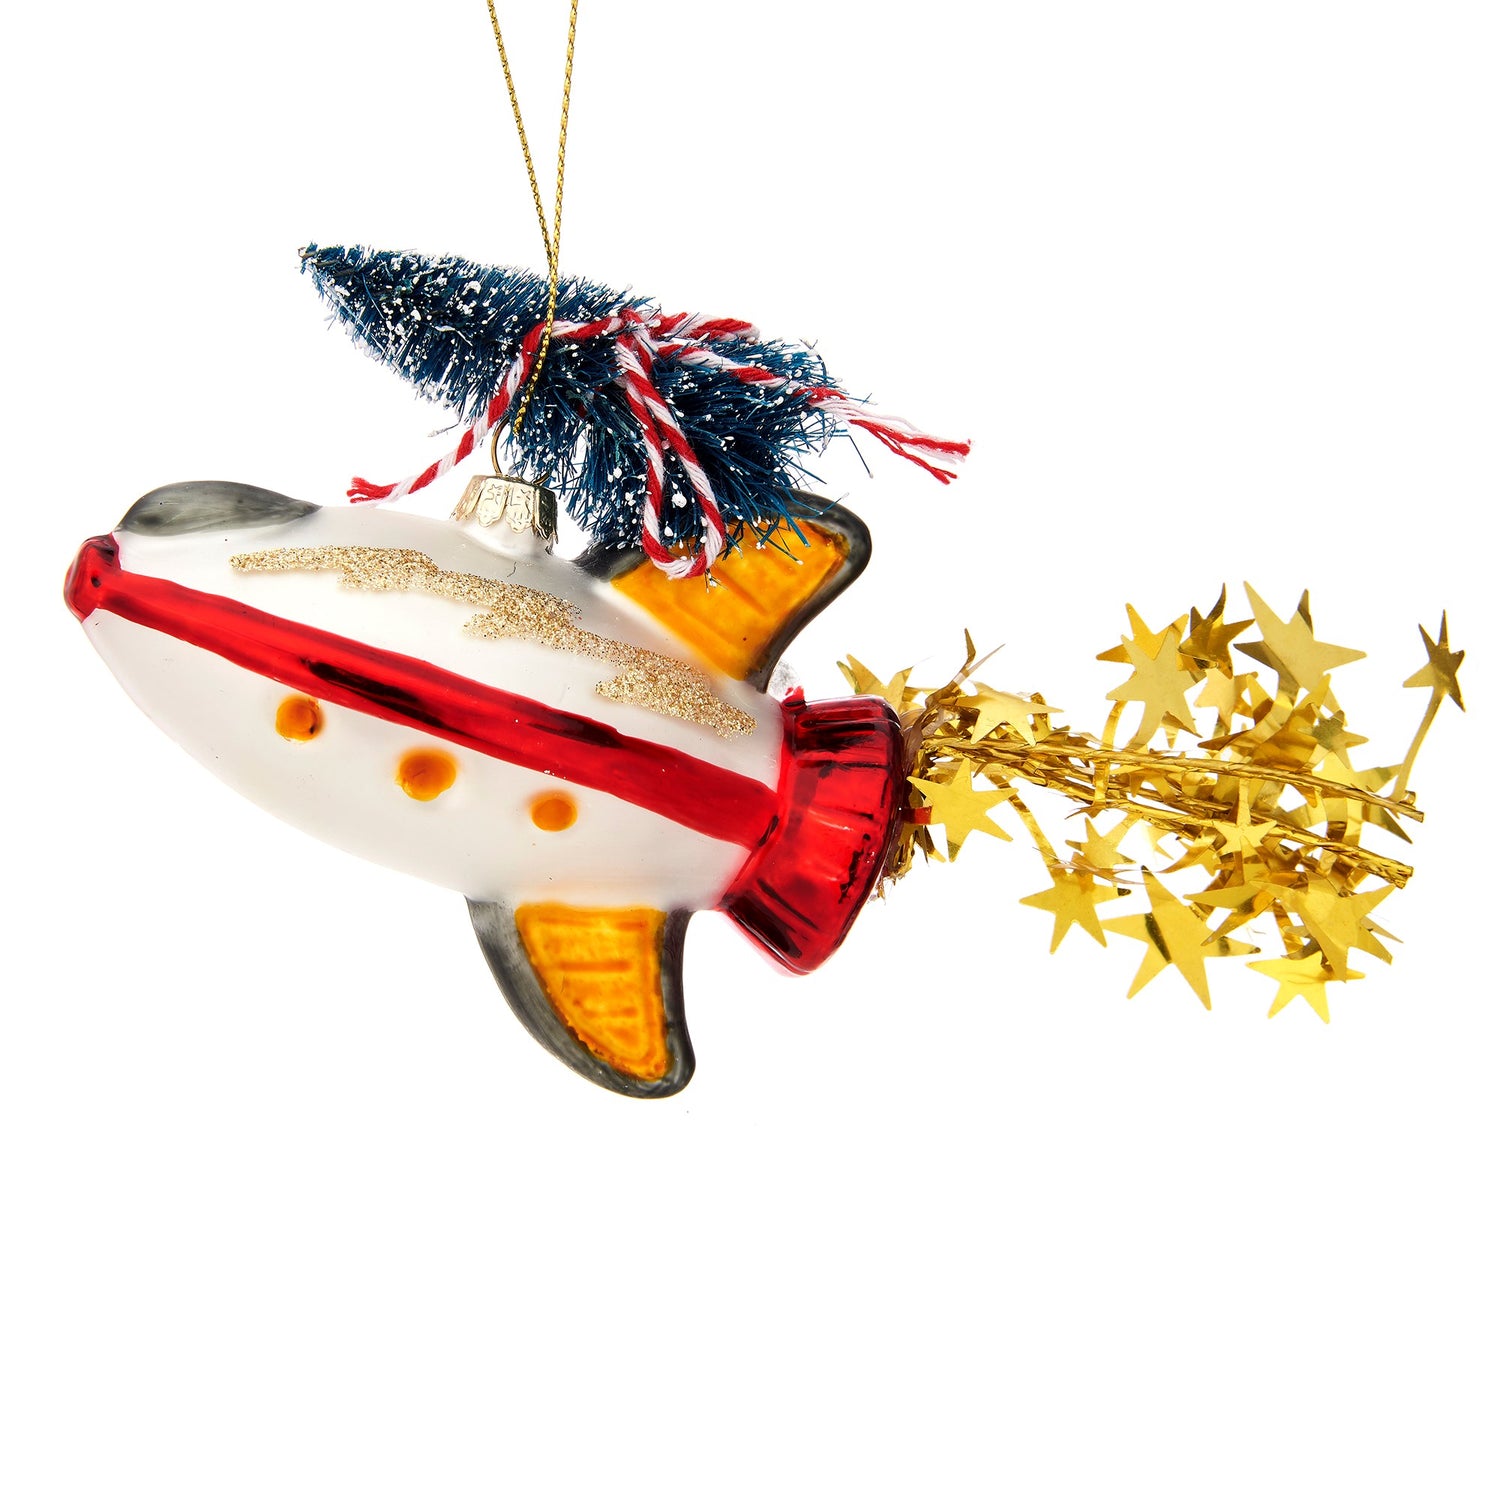 A red and silver rocket carrying a Christmas tree Christmas decoration.